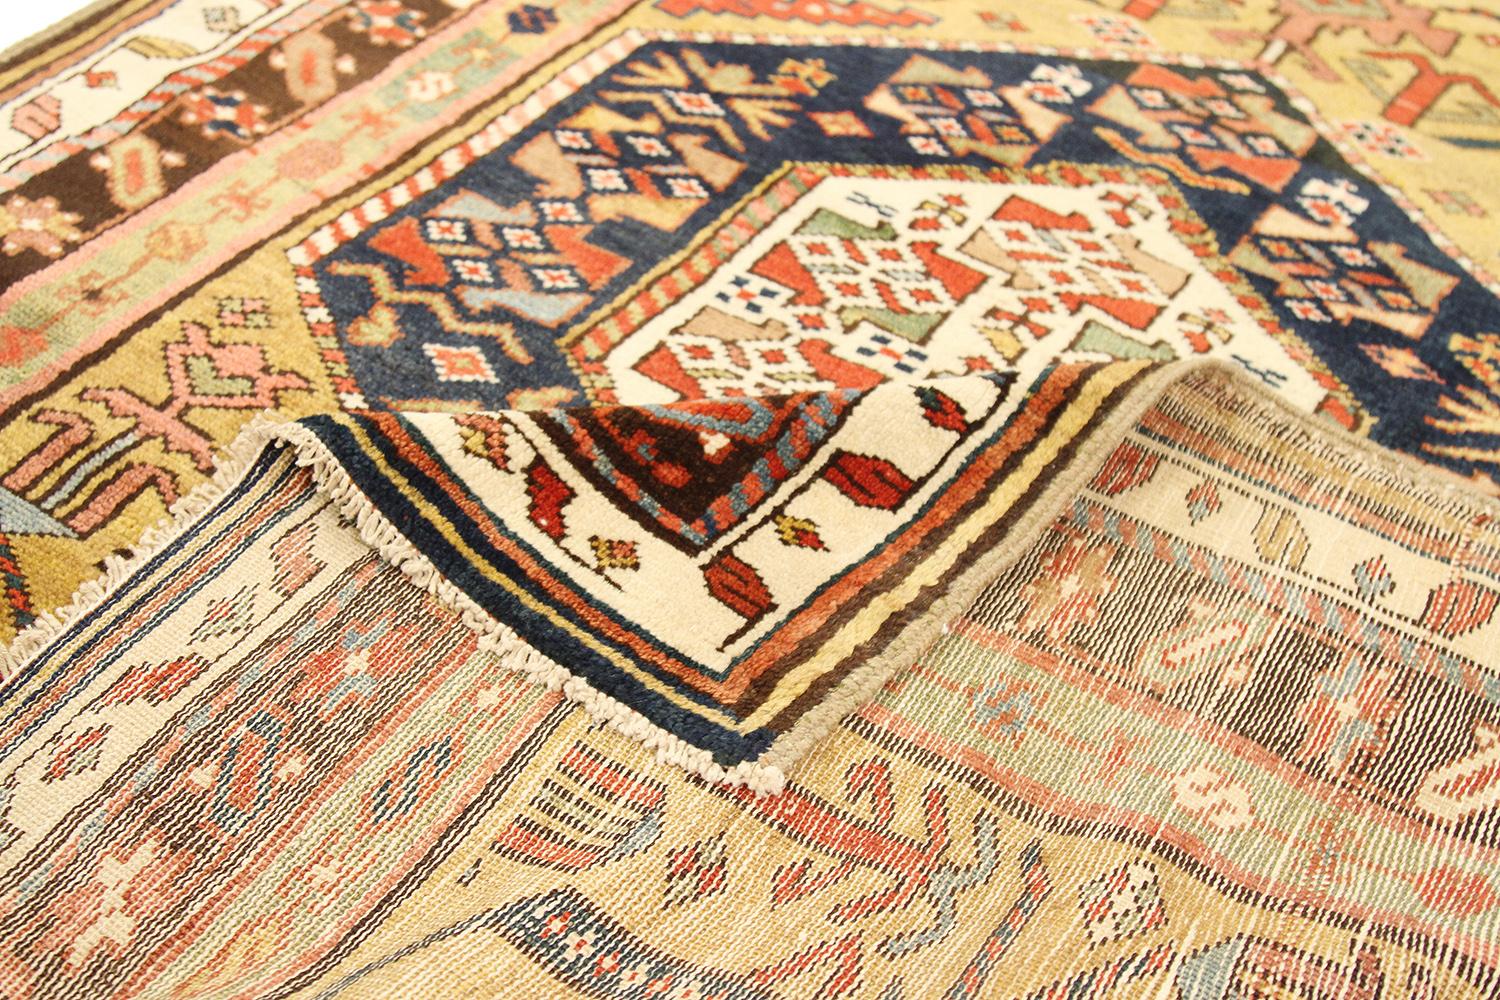 Other Antique Azerbaijan Runner Rug with 3 Geometric Medallions on Center Field For Sale